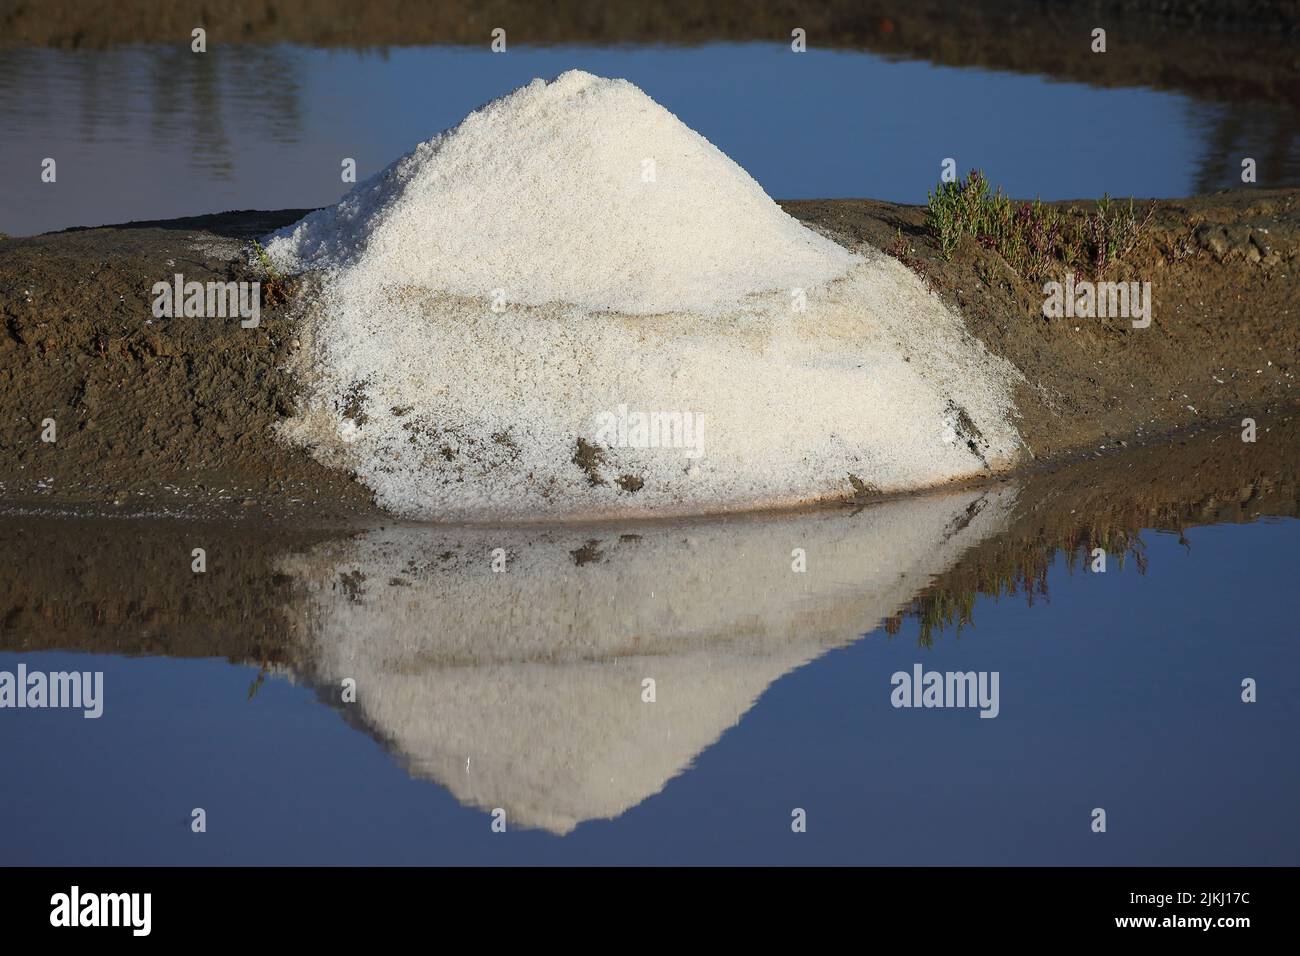 A freshly mined sea salt ready for packaging Stock Photo